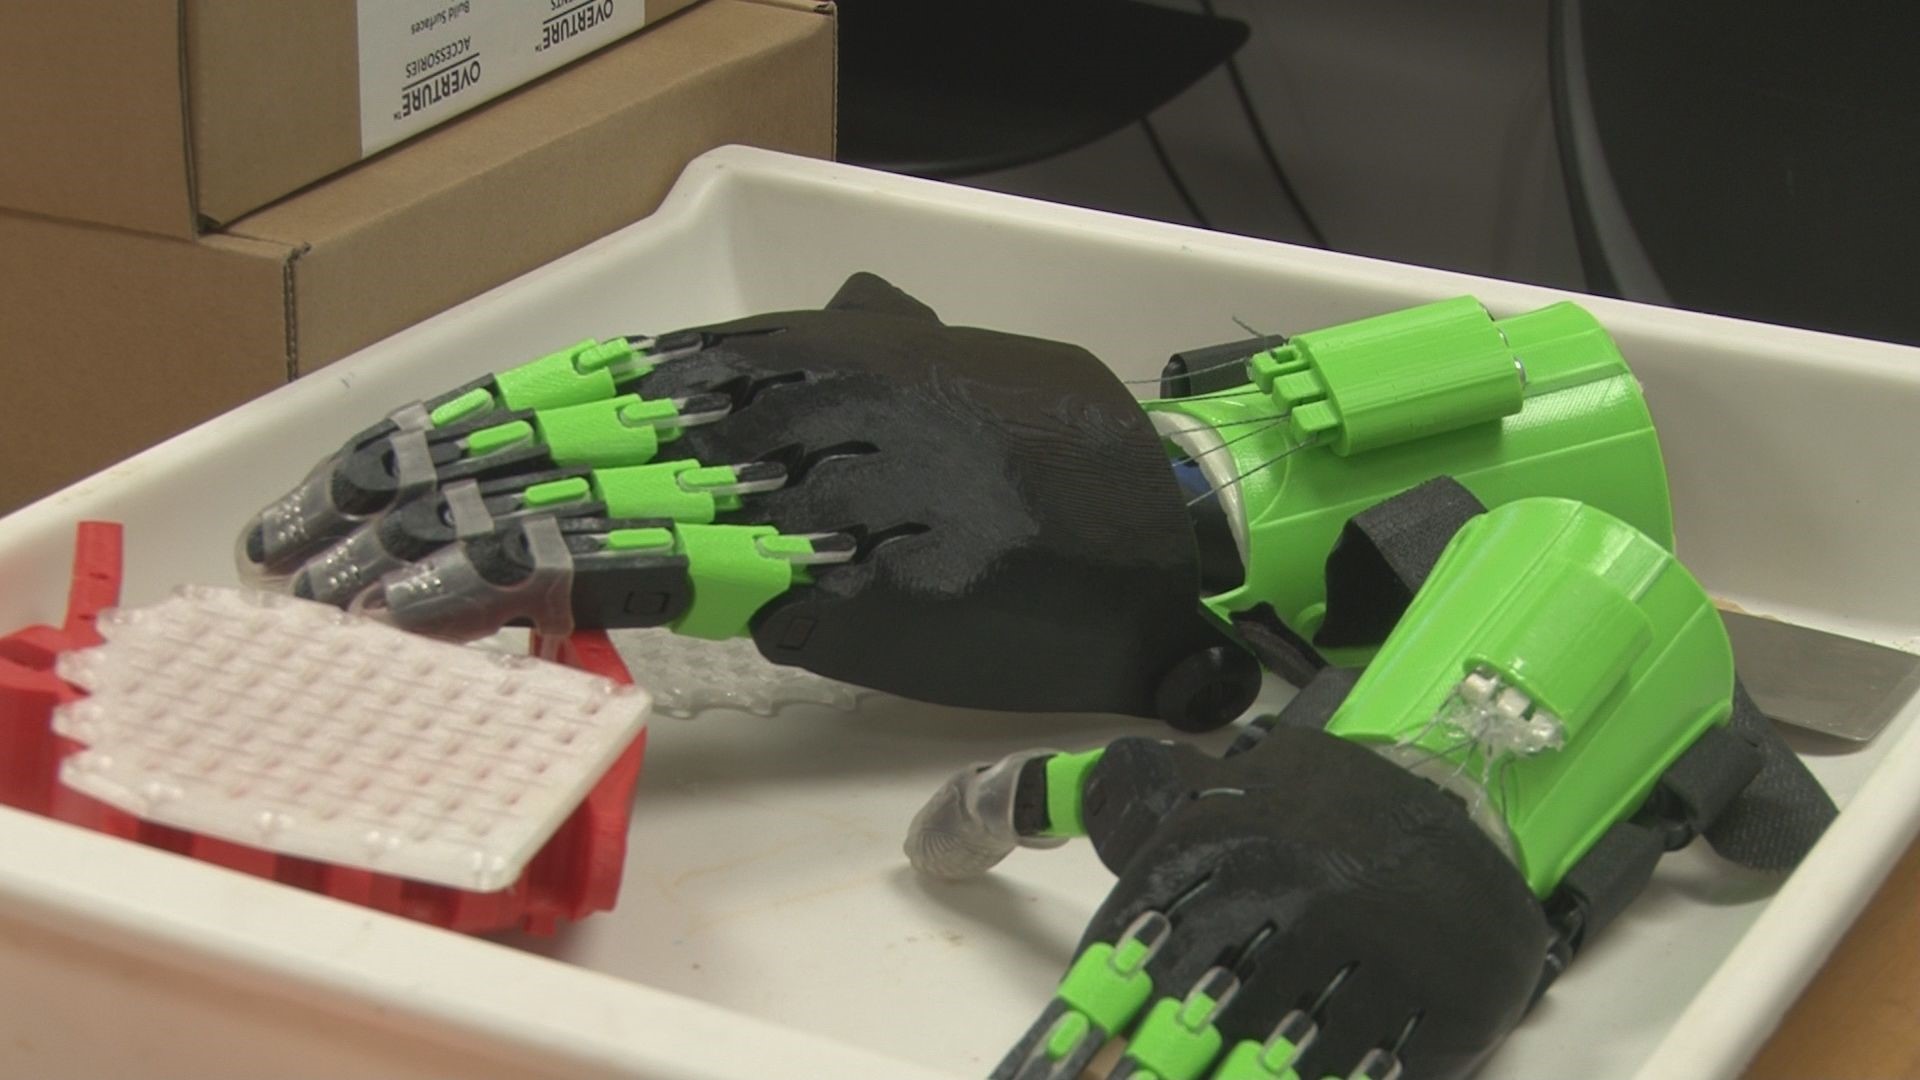 High schoolers made a sensory glove to help a man with nerve damage detect temperature and pressure, while 5th graders made a robotic hand